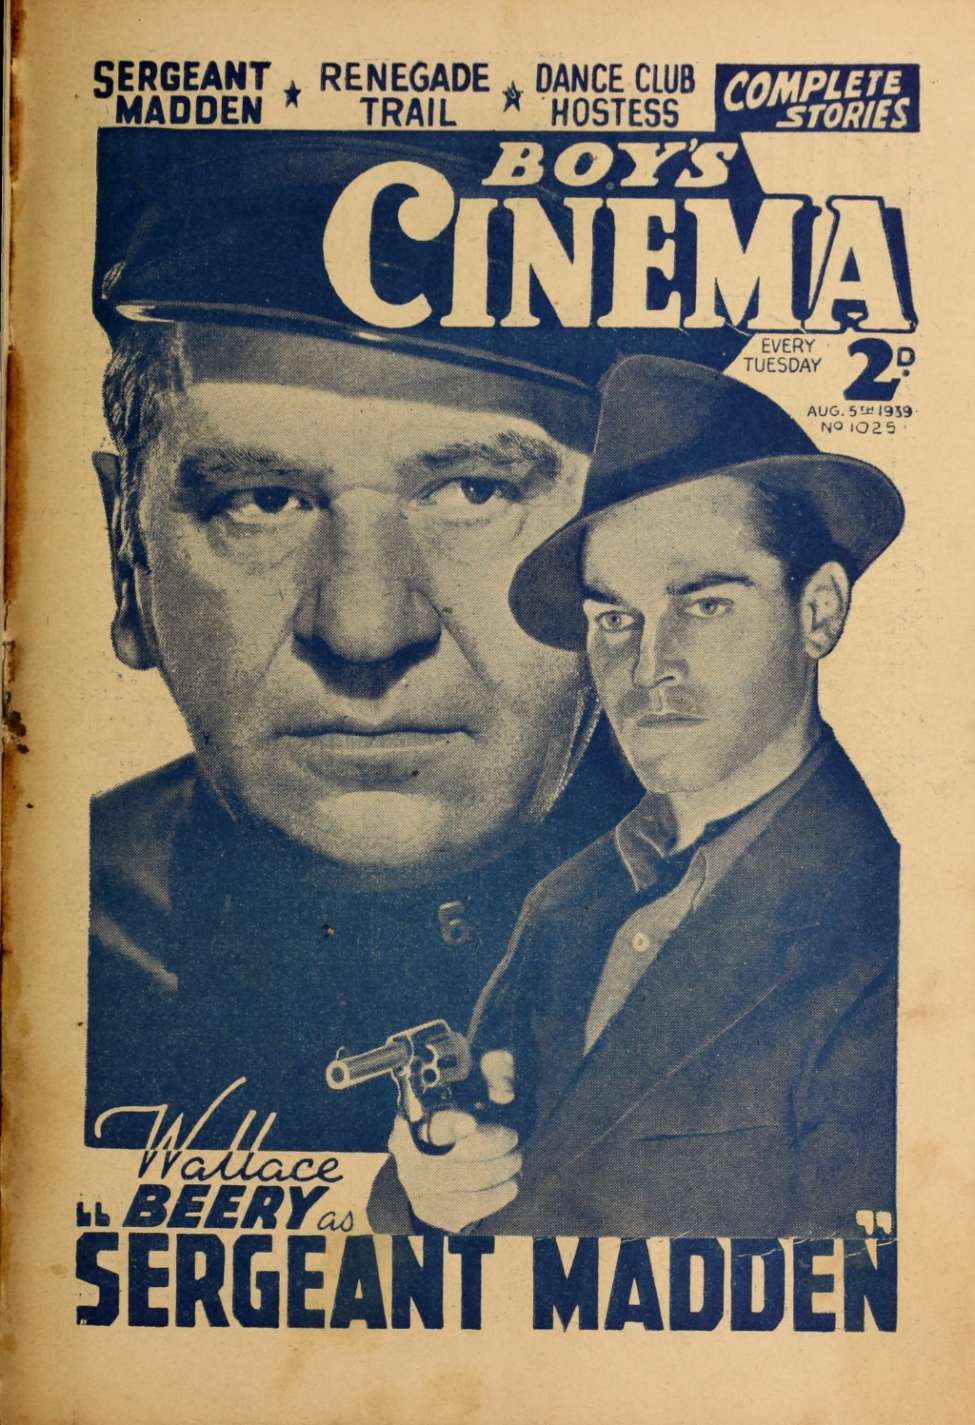 Comic Book Cover For Boy's Cinema 1025 - Sergeant Madden - Wallace Beery